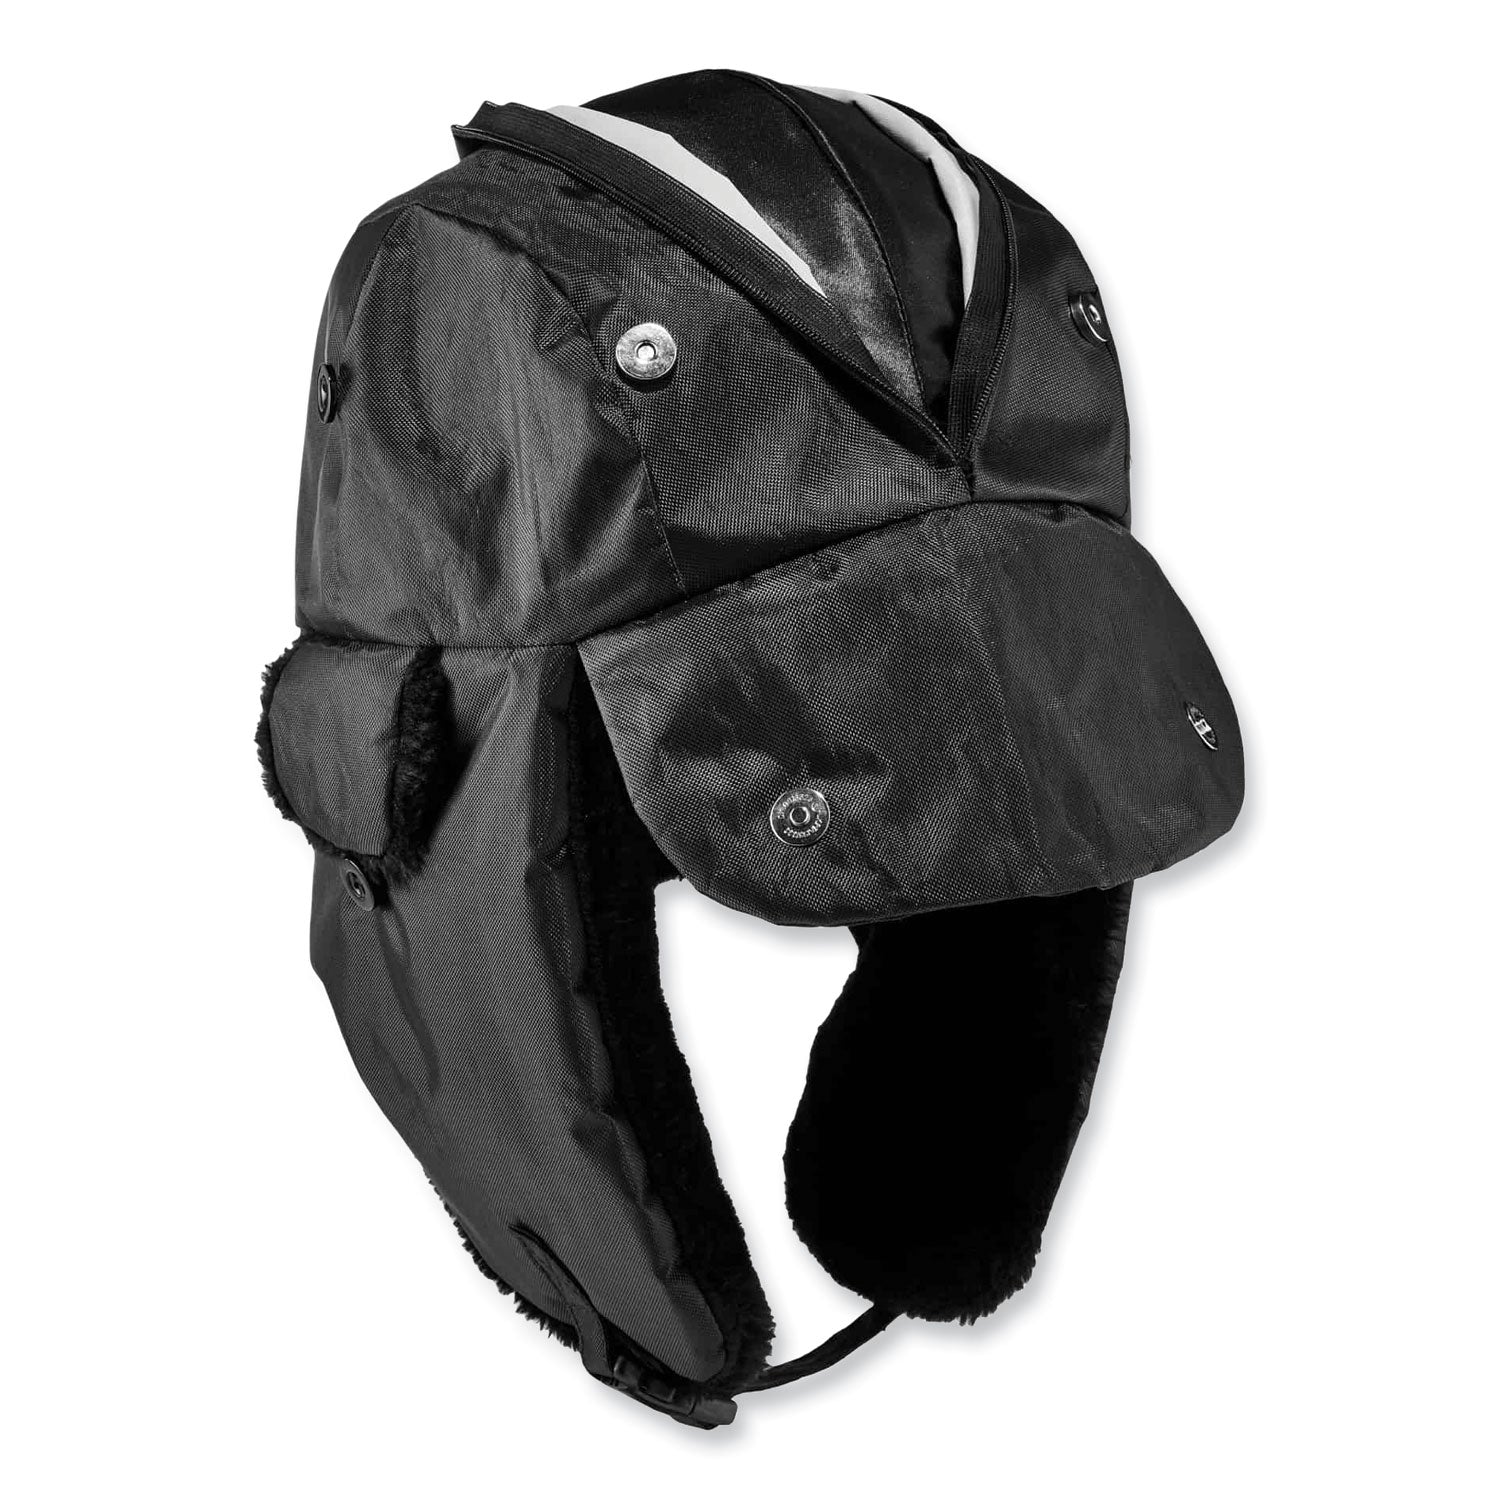 n-ferno-6802z-zippered-trapper-hat-small-medium-black-ships-in-1-3-business-days_ego16857 - 1